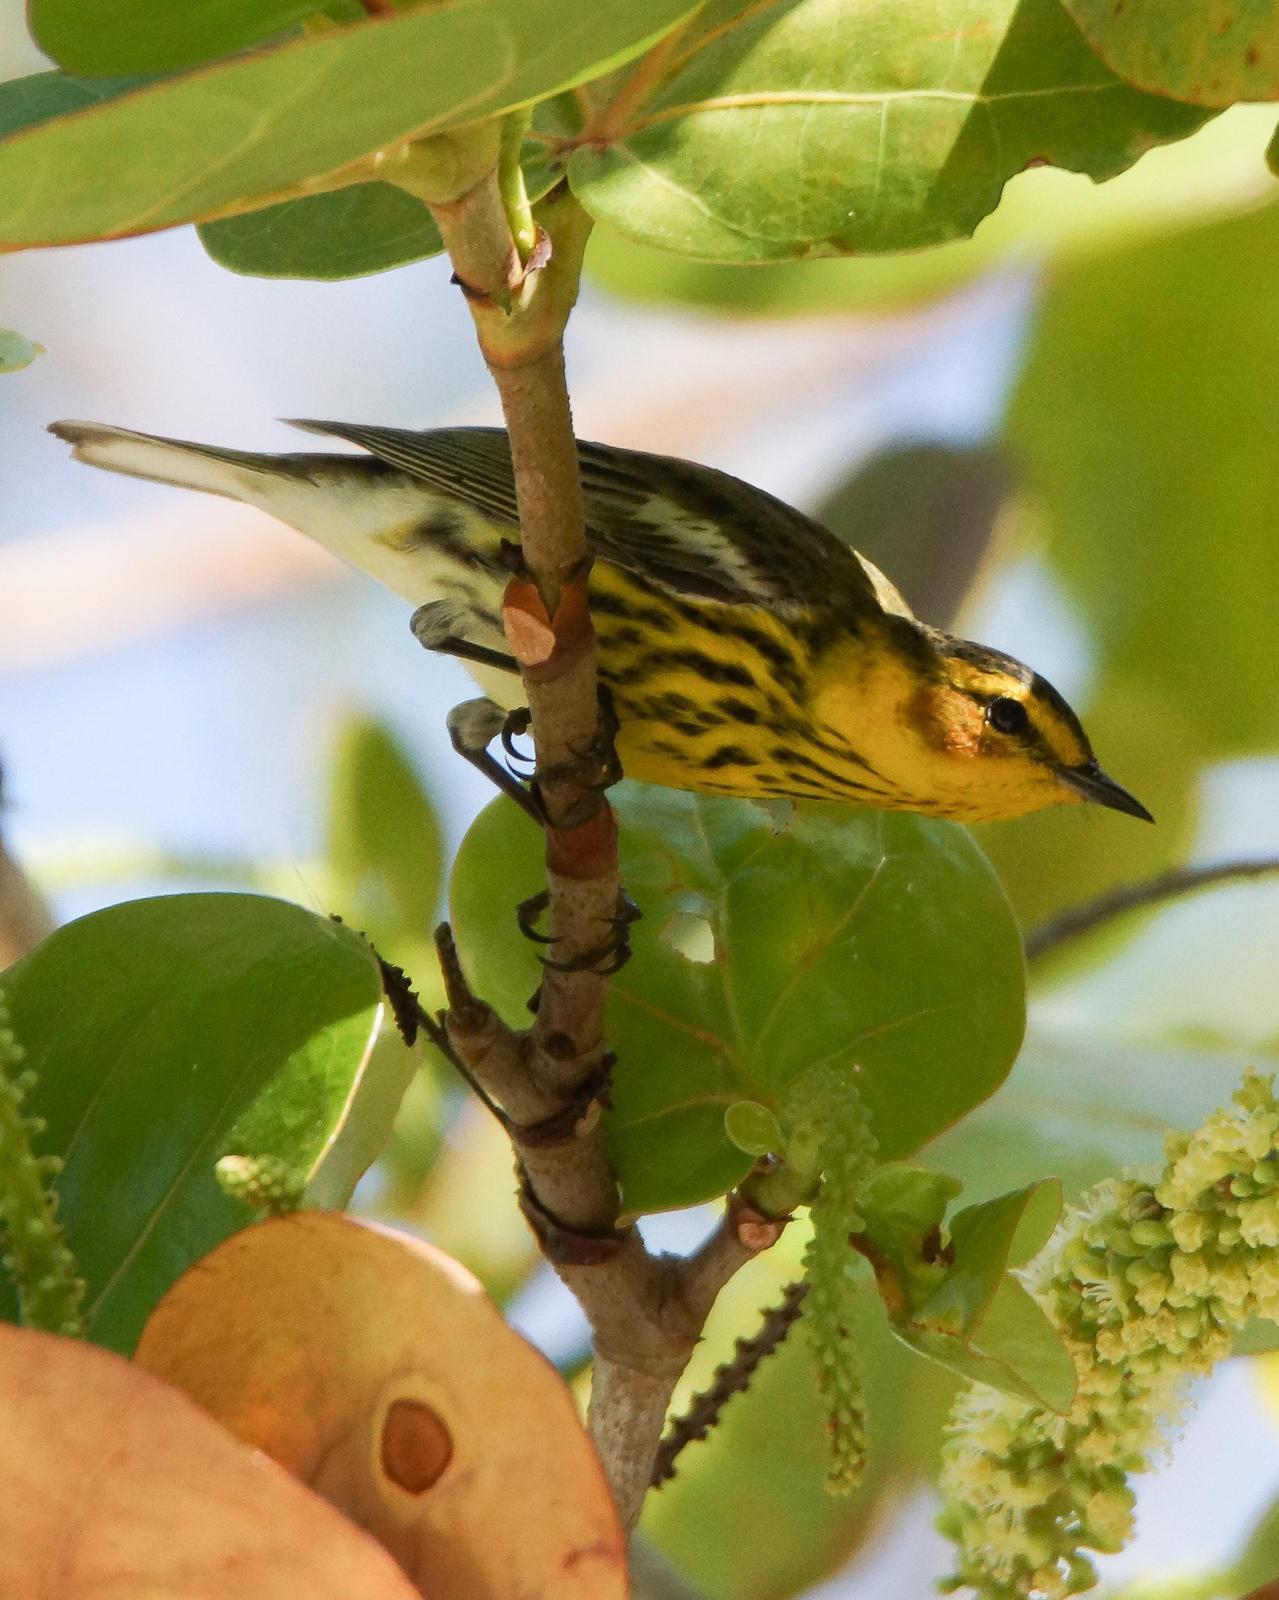 Cape May Warbler Photo by Steve Percival